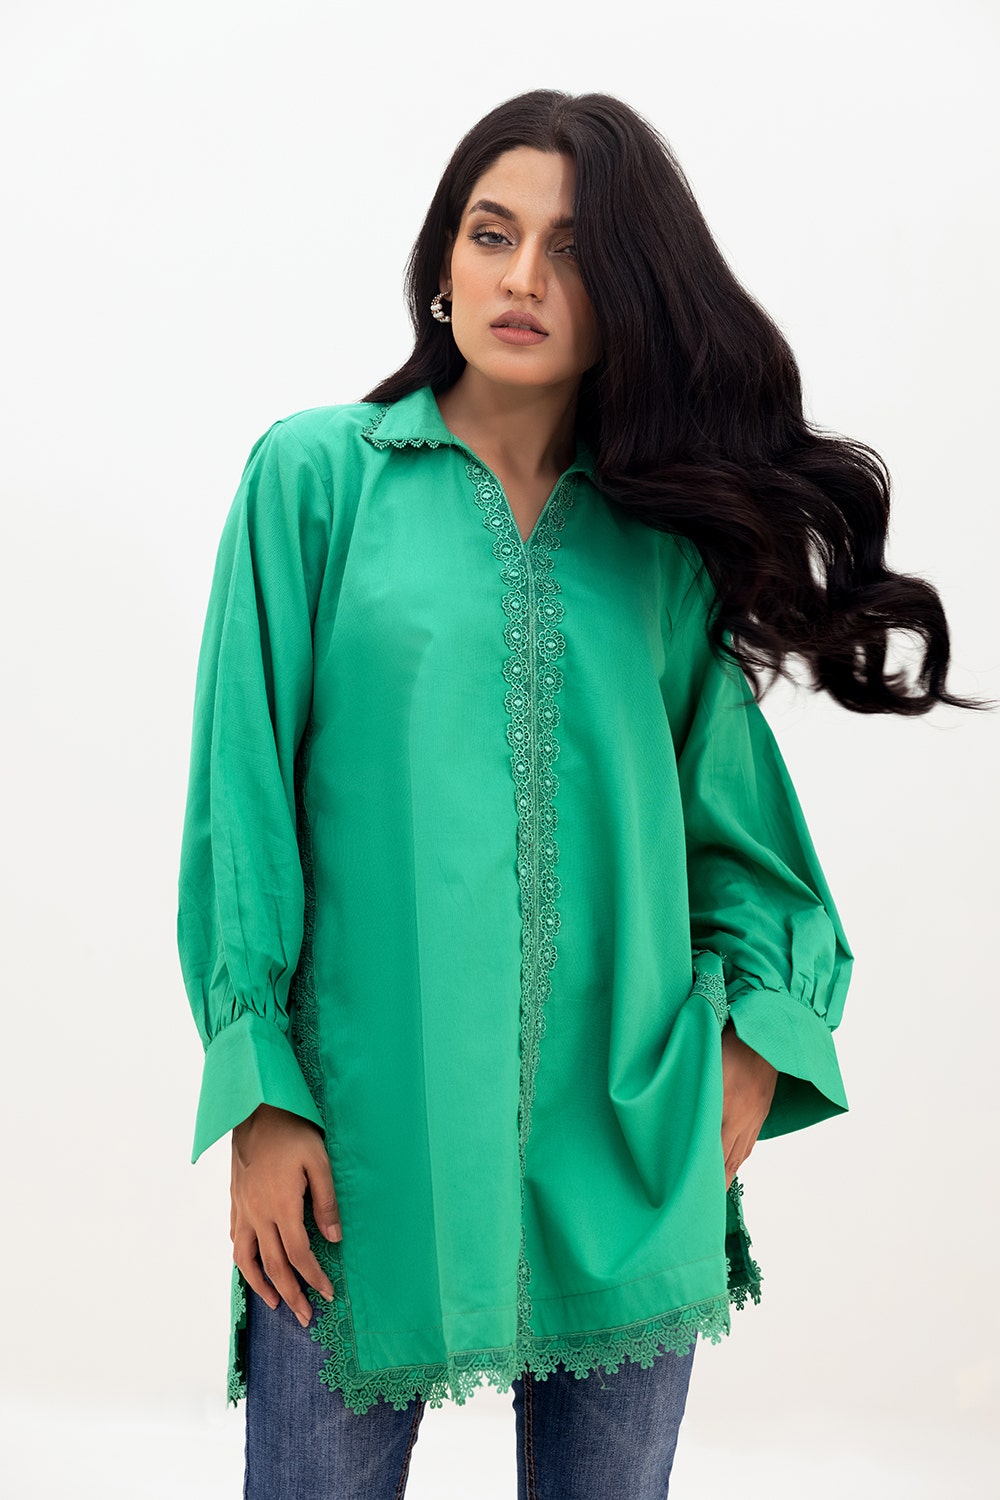 Gul Ahmed 01 Piece Stitched Studio Collection Dyed Shirt WGK-CTS-DY-1538